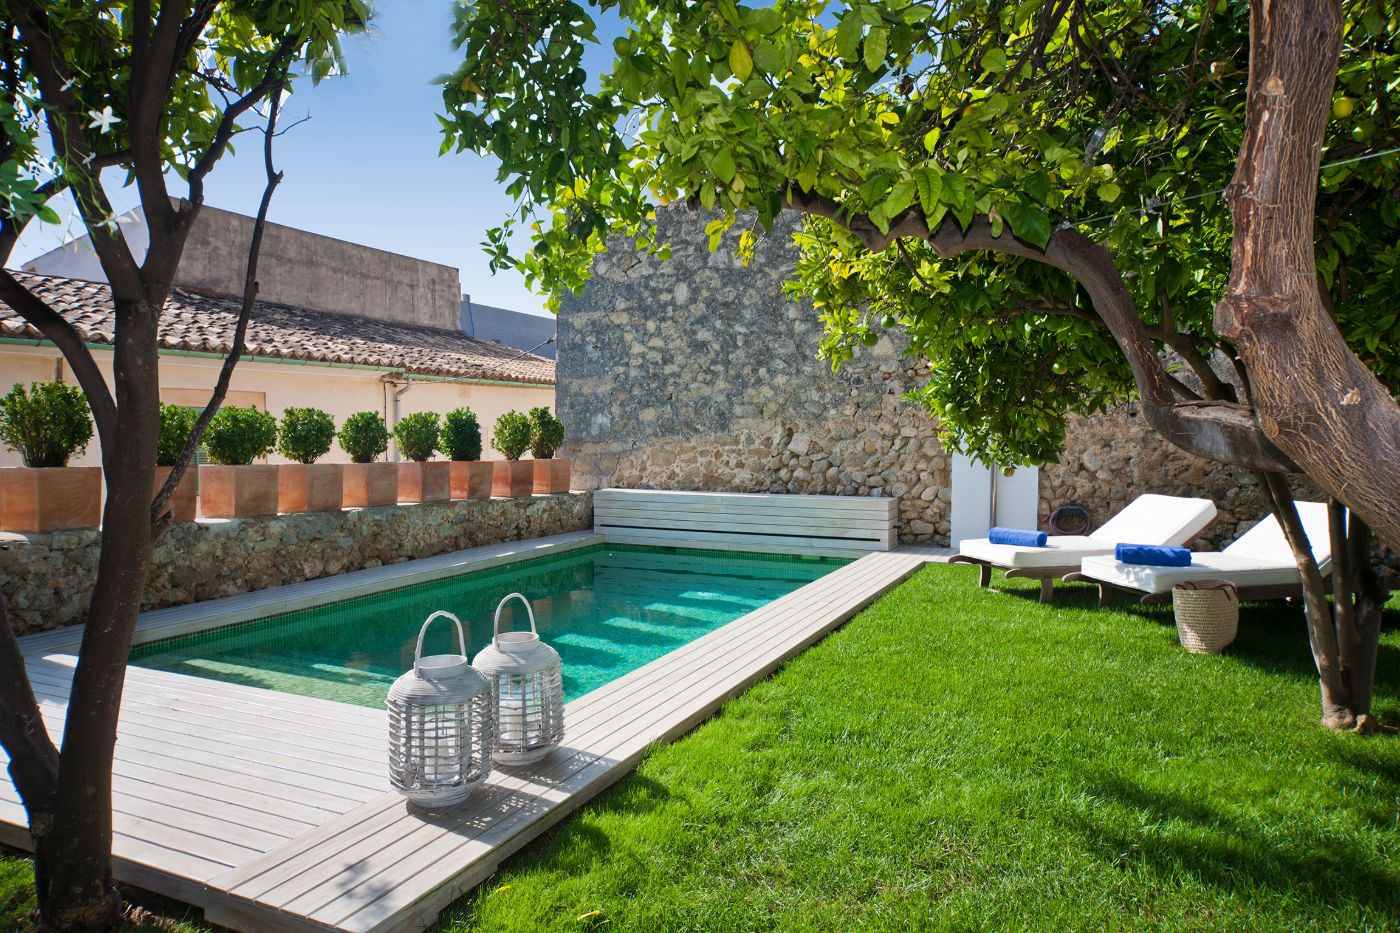 Pool and garden with loungers at Casa Blanca